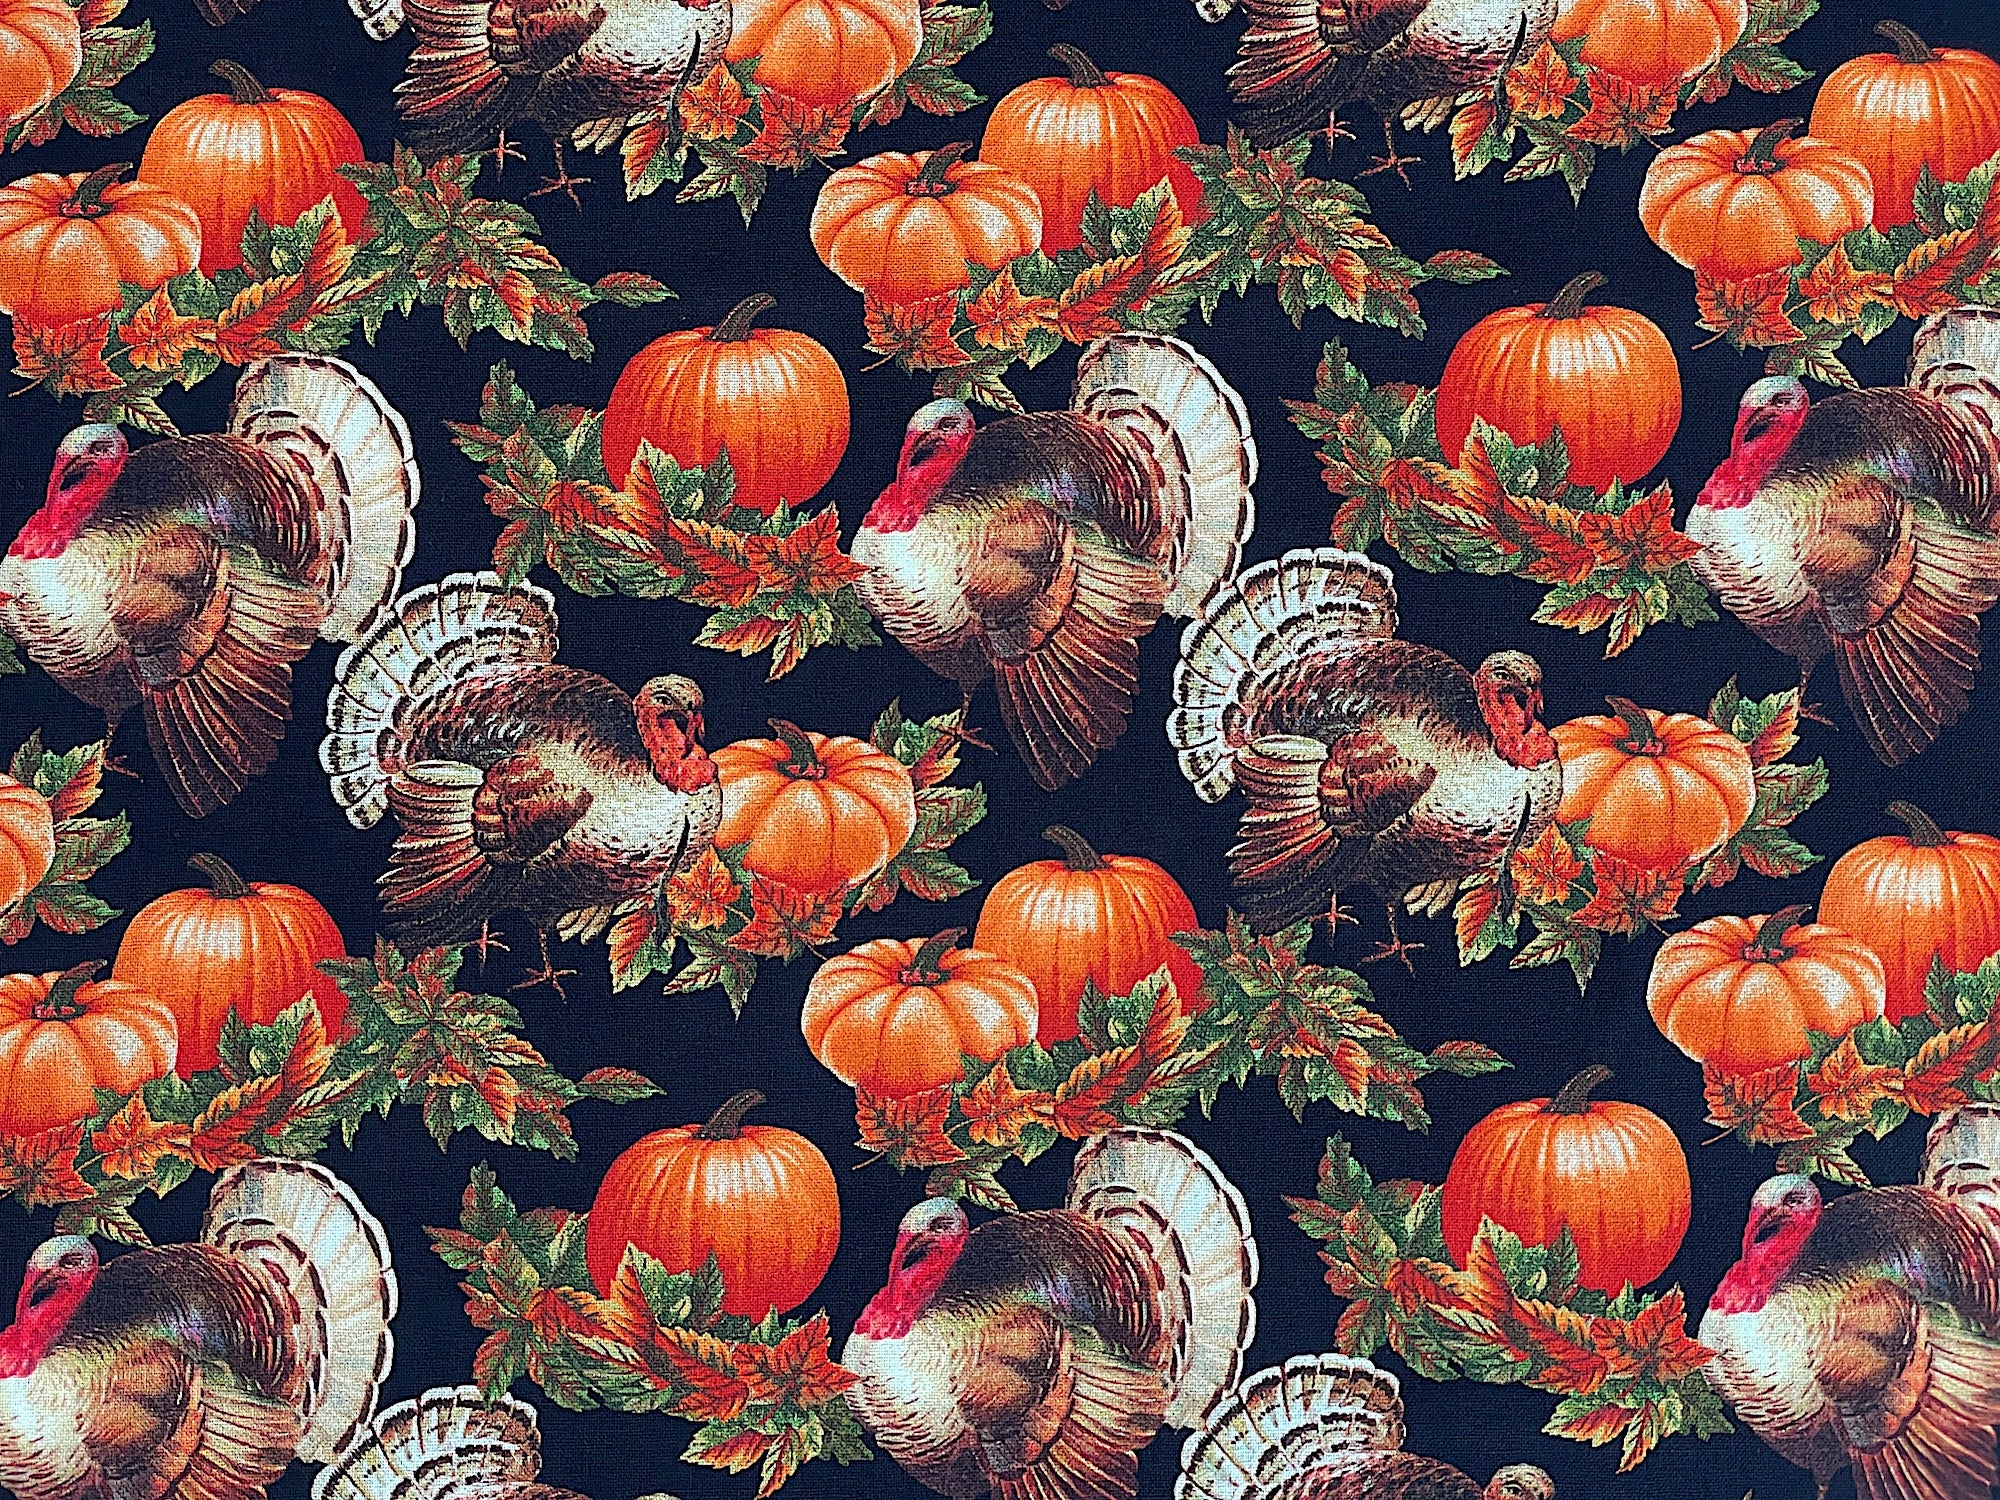 Cotton fabric covered with turkeys and pumpkins.